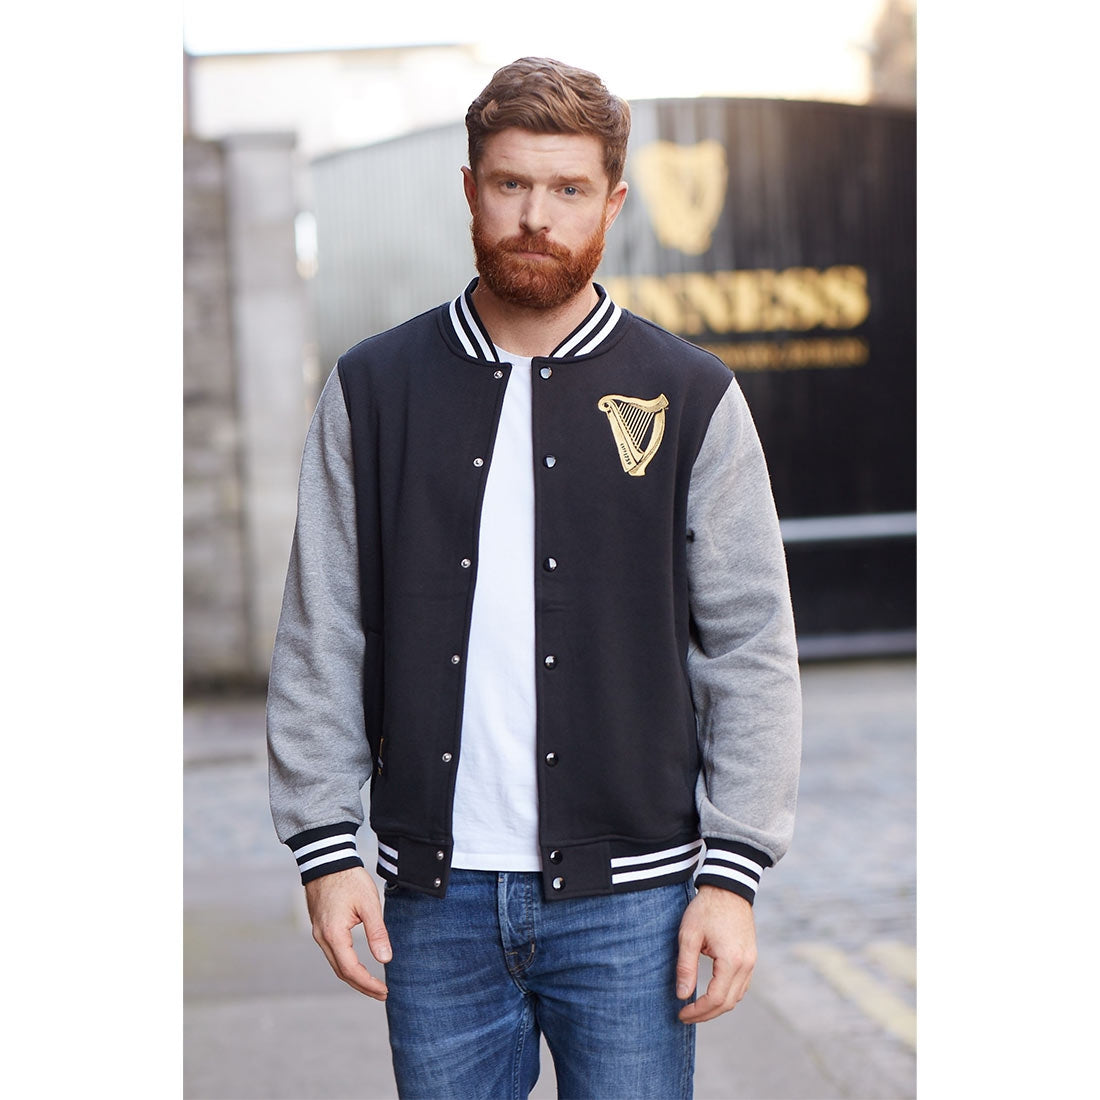 Guide To Correctly Placing Letterman Jacket Patches